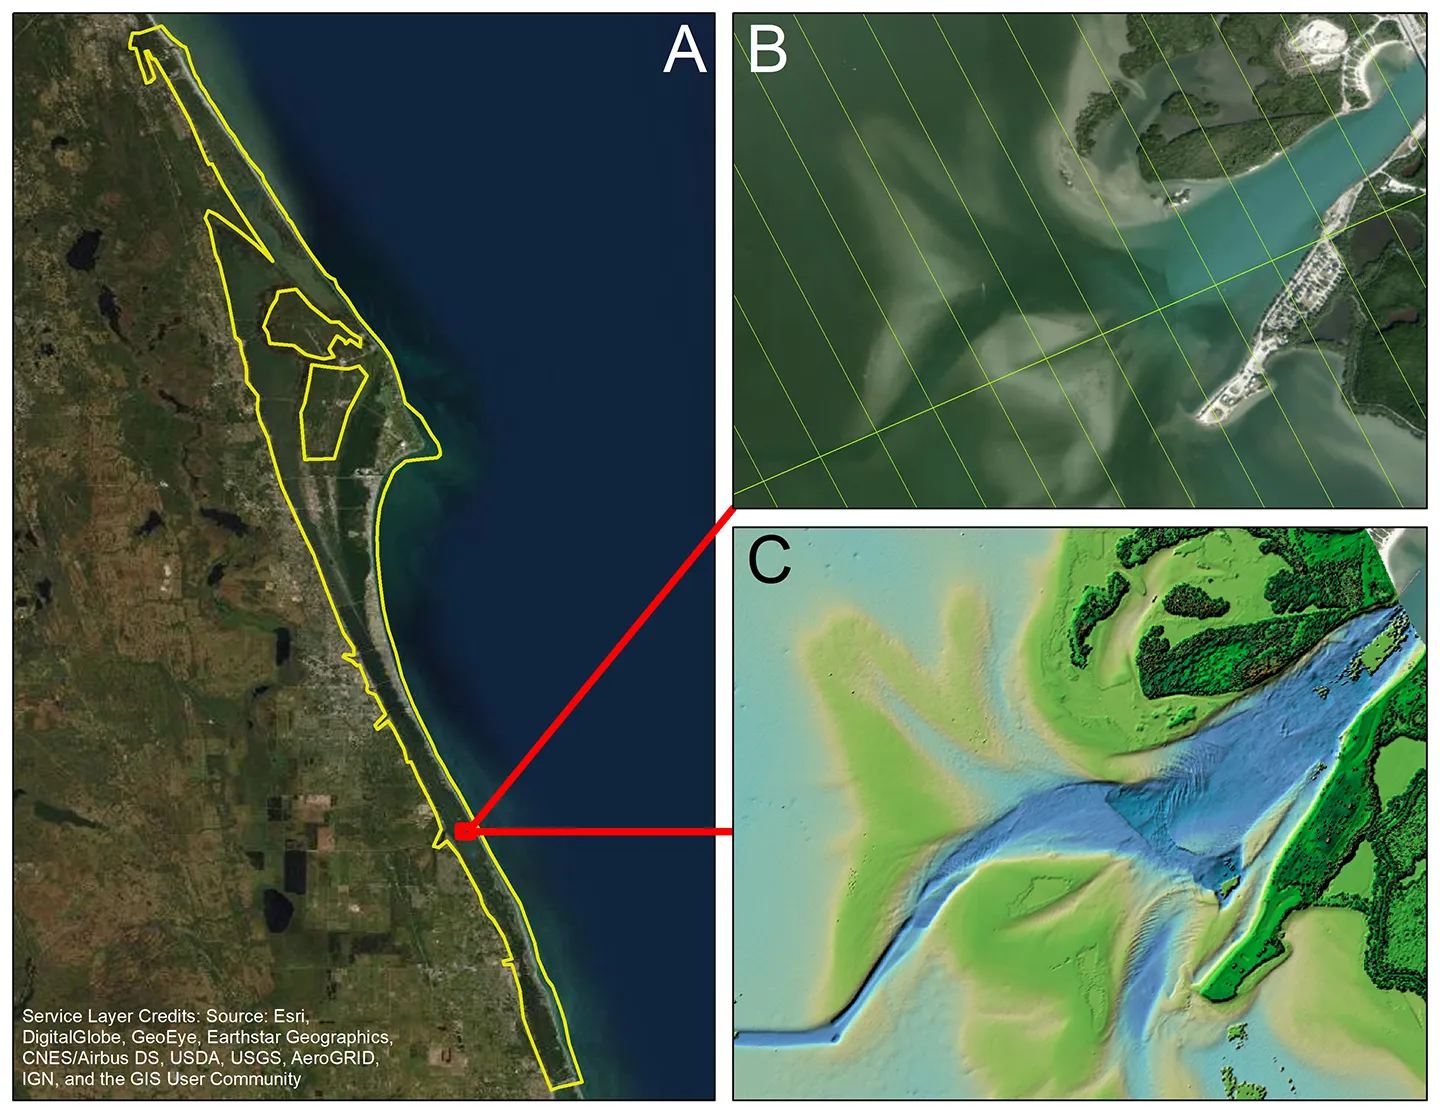 The sensor improves topographic and bathymetric mapping in Indian River Lagoon, Florida. Photo courtesy of Dewberry.